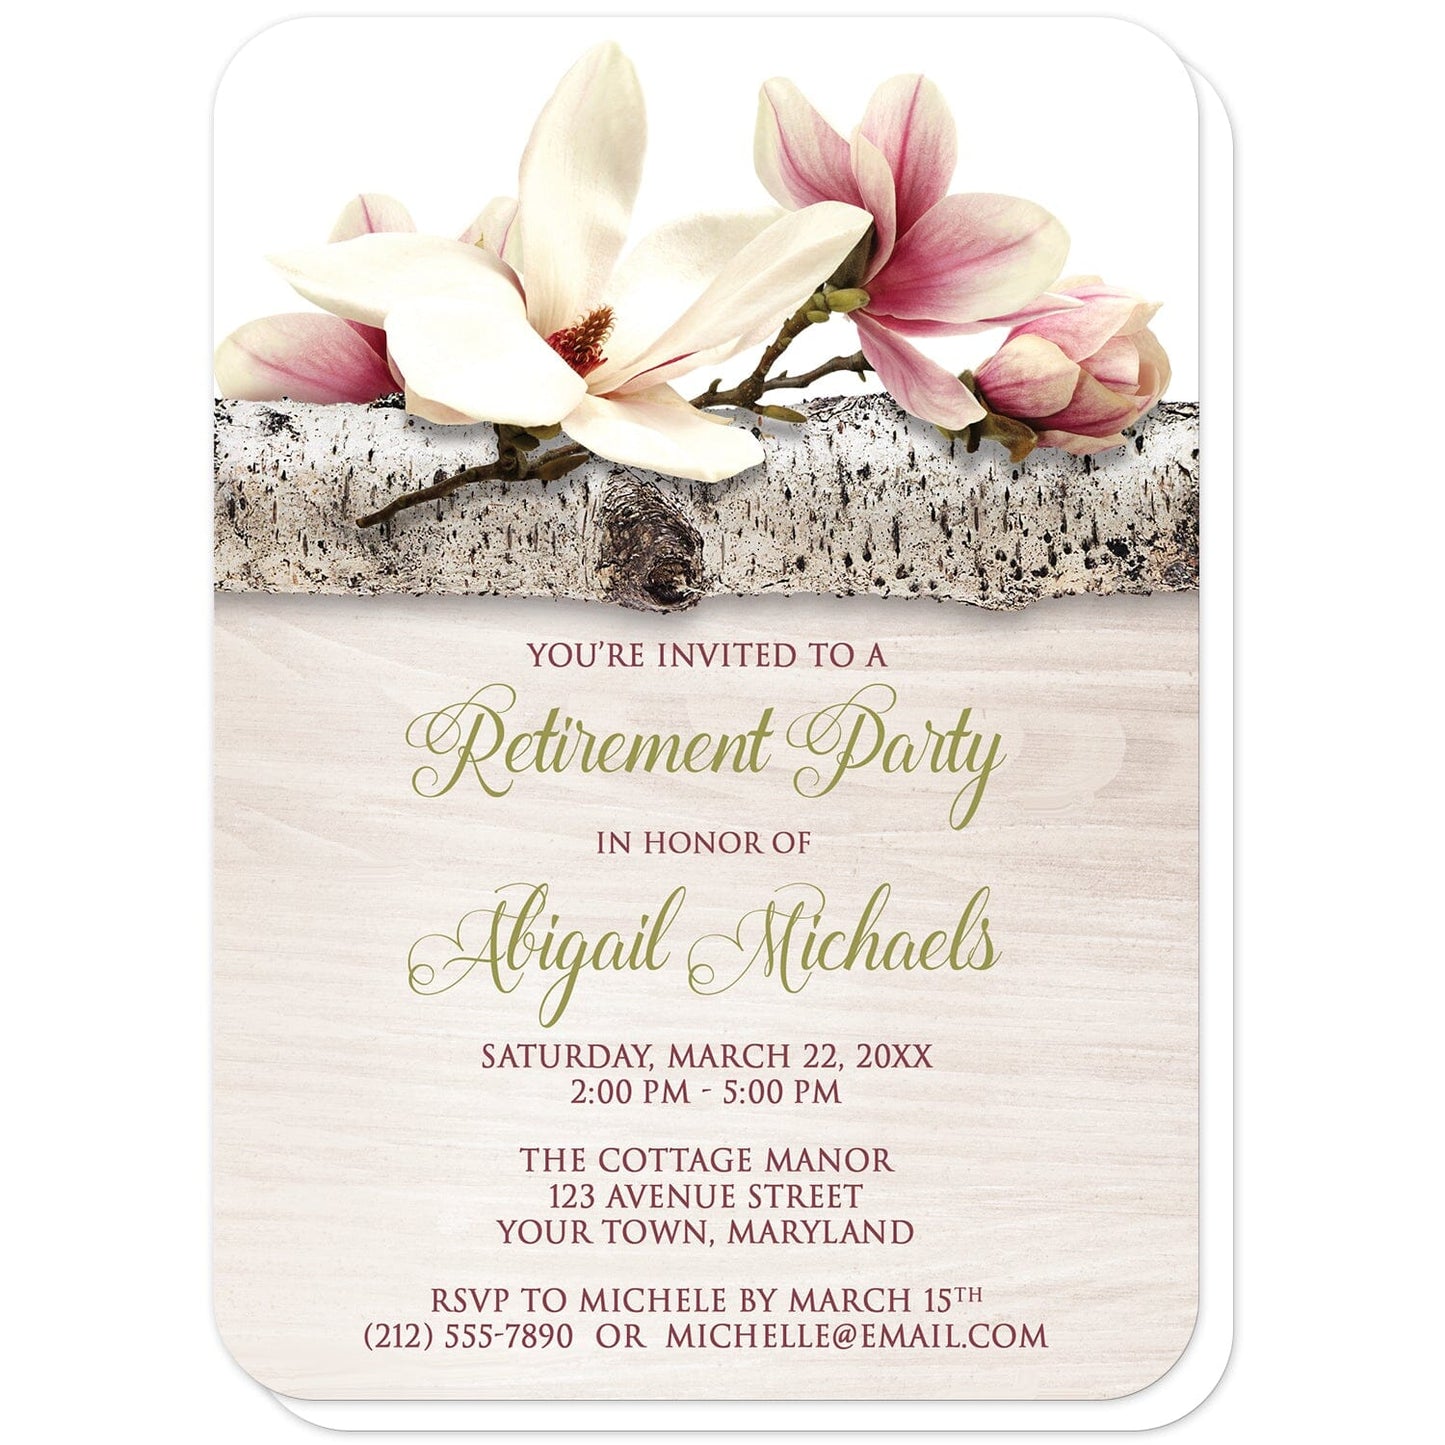 Magnolia Birch Light Wood Floral Retirement Invitations (with rounded corners) at Artistically Invited. Beautiful magnolia birch light wood floral retirement invitations with pink and white magnolia flowers laying on a birch tree branch along the top. Your personalized retirement party details are custom printed in dark pink and light olive green over a light wood background illustration.